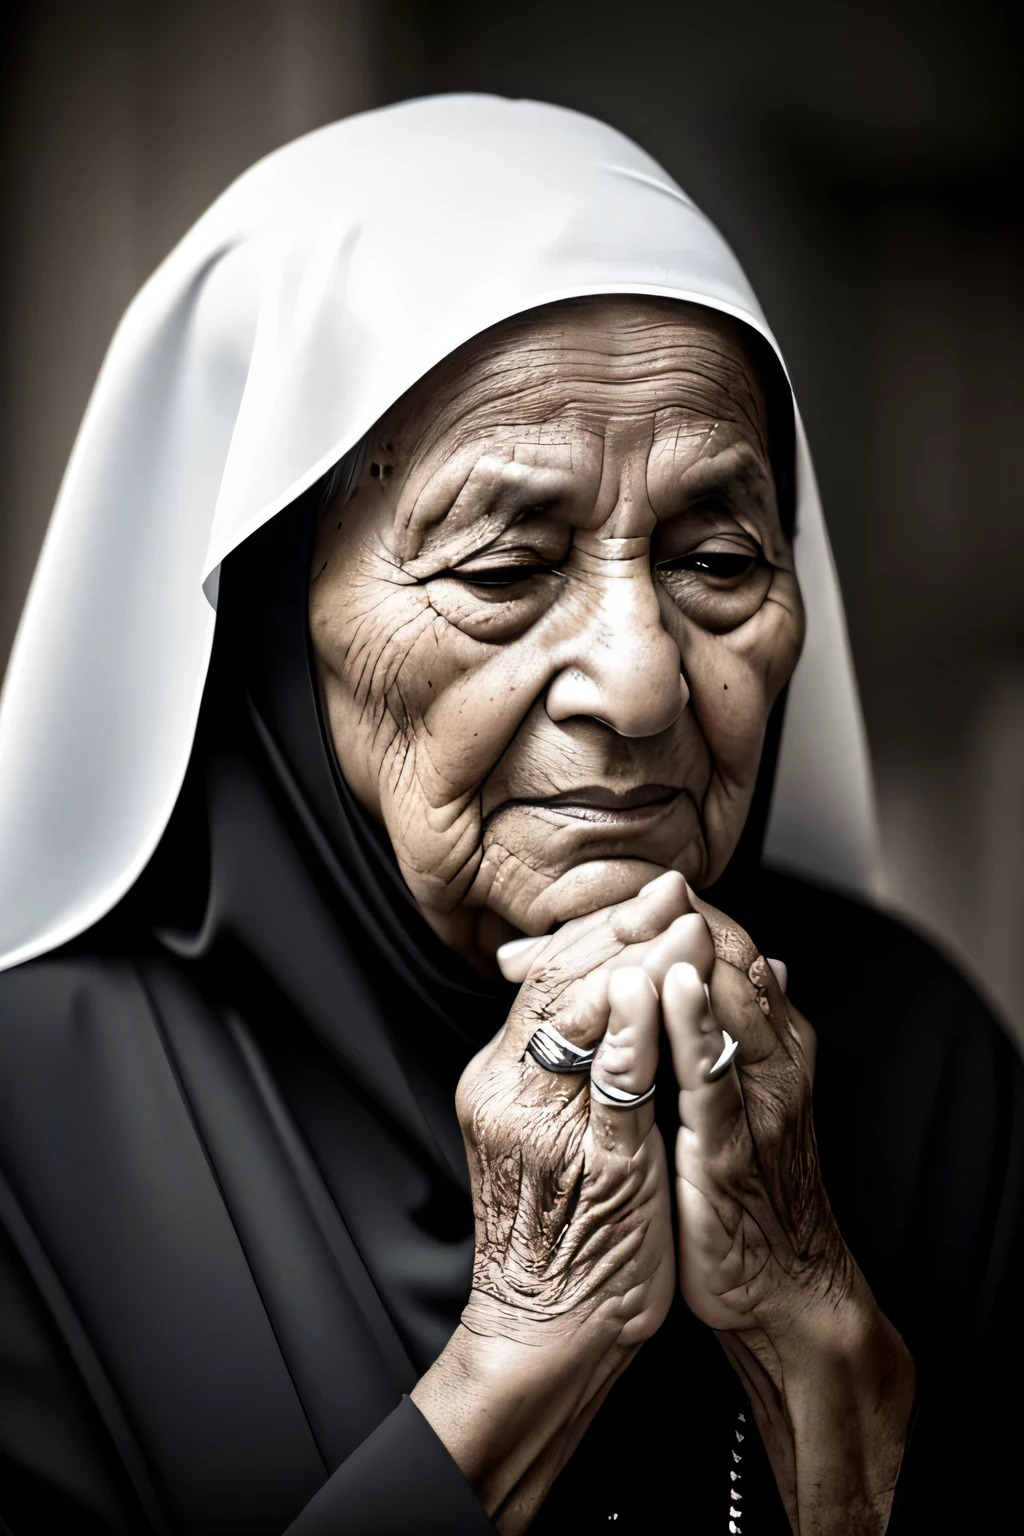 A wise and weathered nun with deep-set wrinkles, ((envejecida)), aged and experienced, silver hair peeking out from under her habit, cabello plateado, Head held high, eyes filled with wisdom, mirada sabia, wrinkles telling stories of a life well-lived. Dressed in traditional black and white attire, dressed in a black and white habit, her hands clasped in prayer, wrinkled hands clasped in prayer. A serene and peaceful expression on her face, Serene and calm expression, radiating kindness and compassion. The image captures her in a moment of contemplation, The image shows her in a moment of reflection, surrounded by the serenity of the